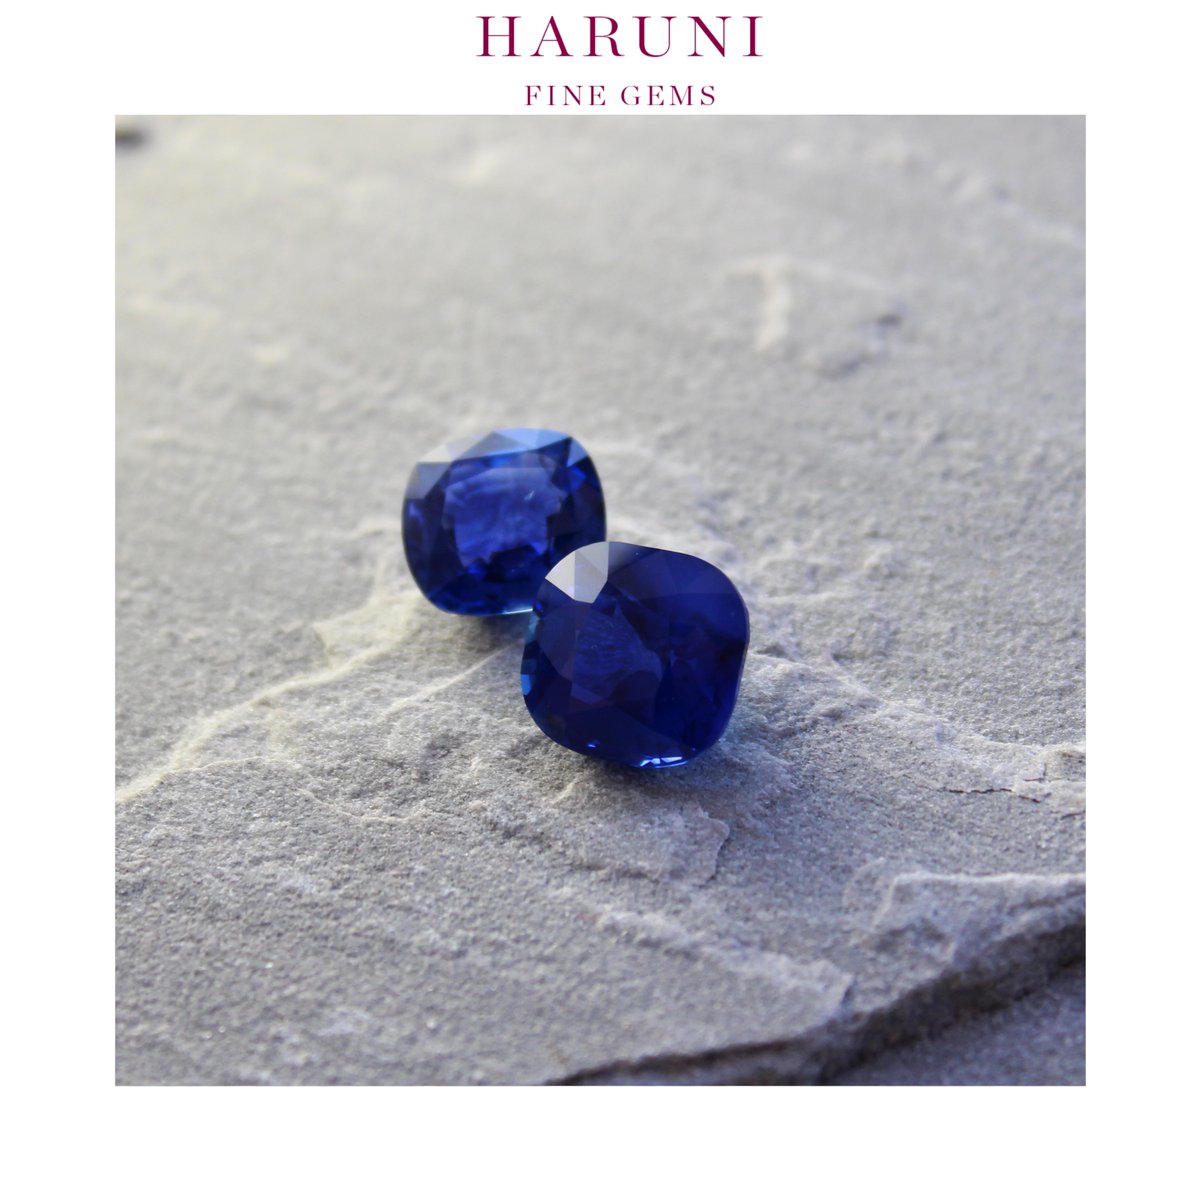 A sapphire or two has never hurt anyone… How would you wear yours? #SapphireJewellery